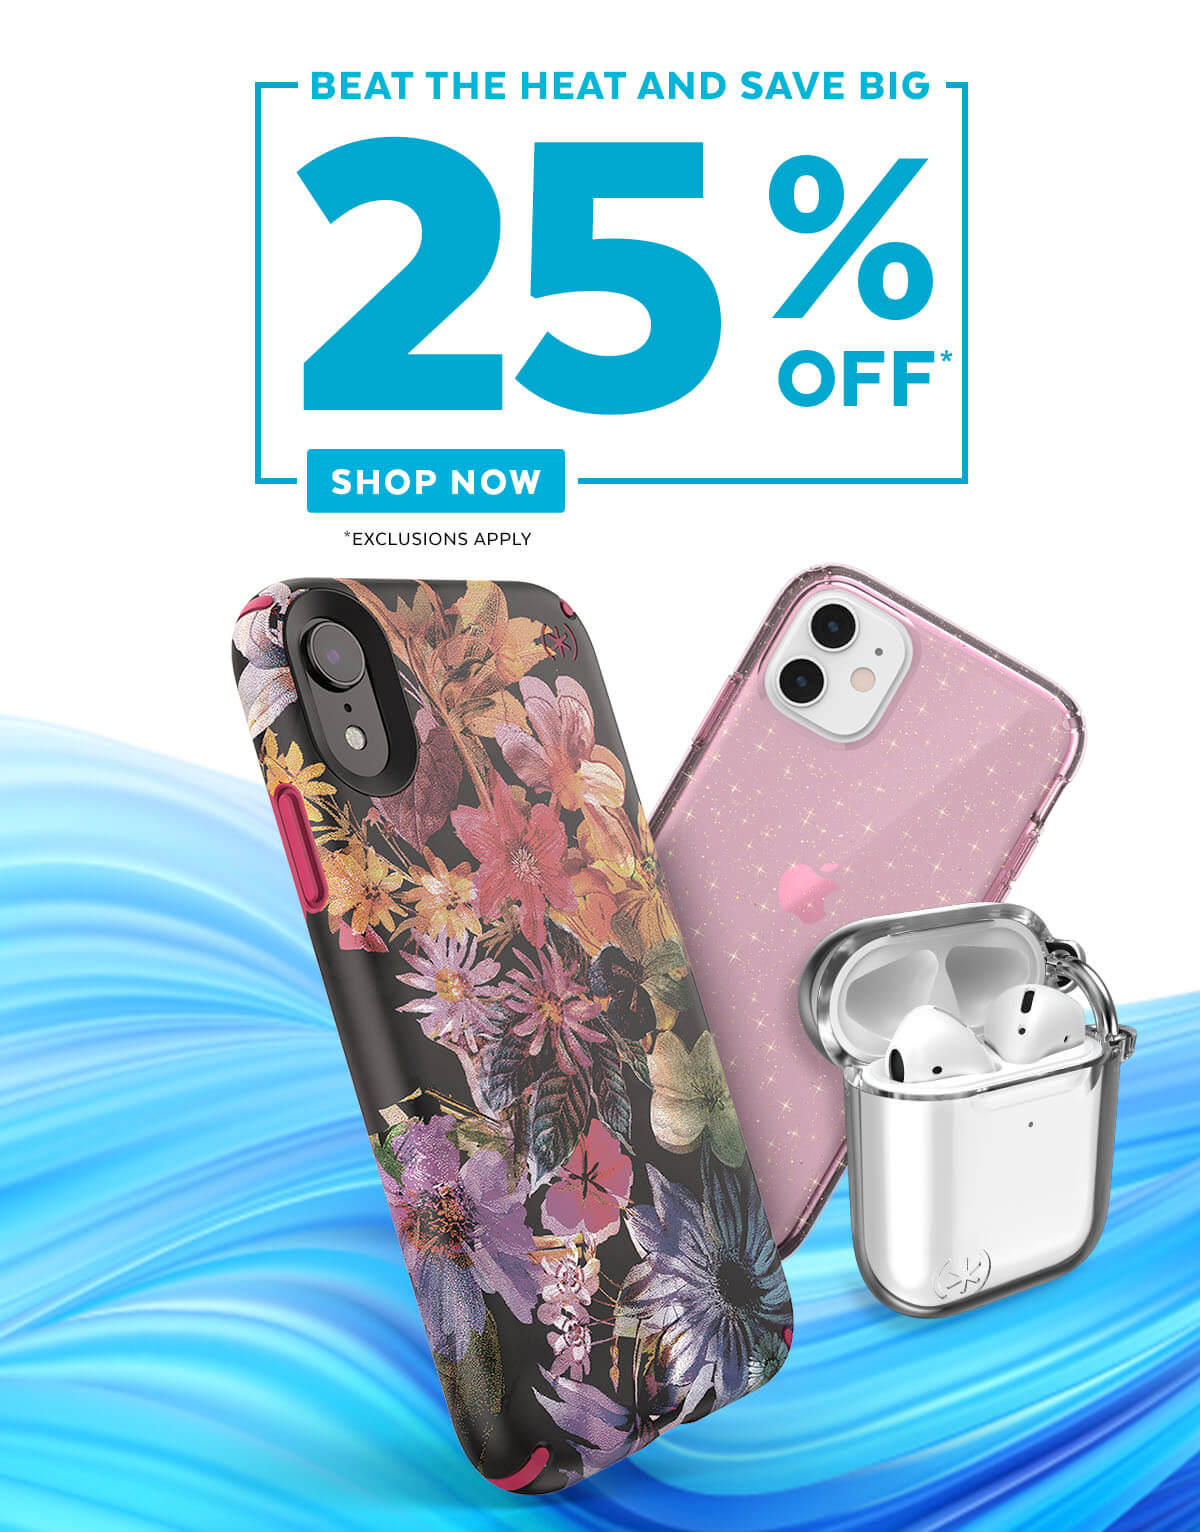 Beat the heat and save big. 25% off. Shop now. Exclusions Apply.